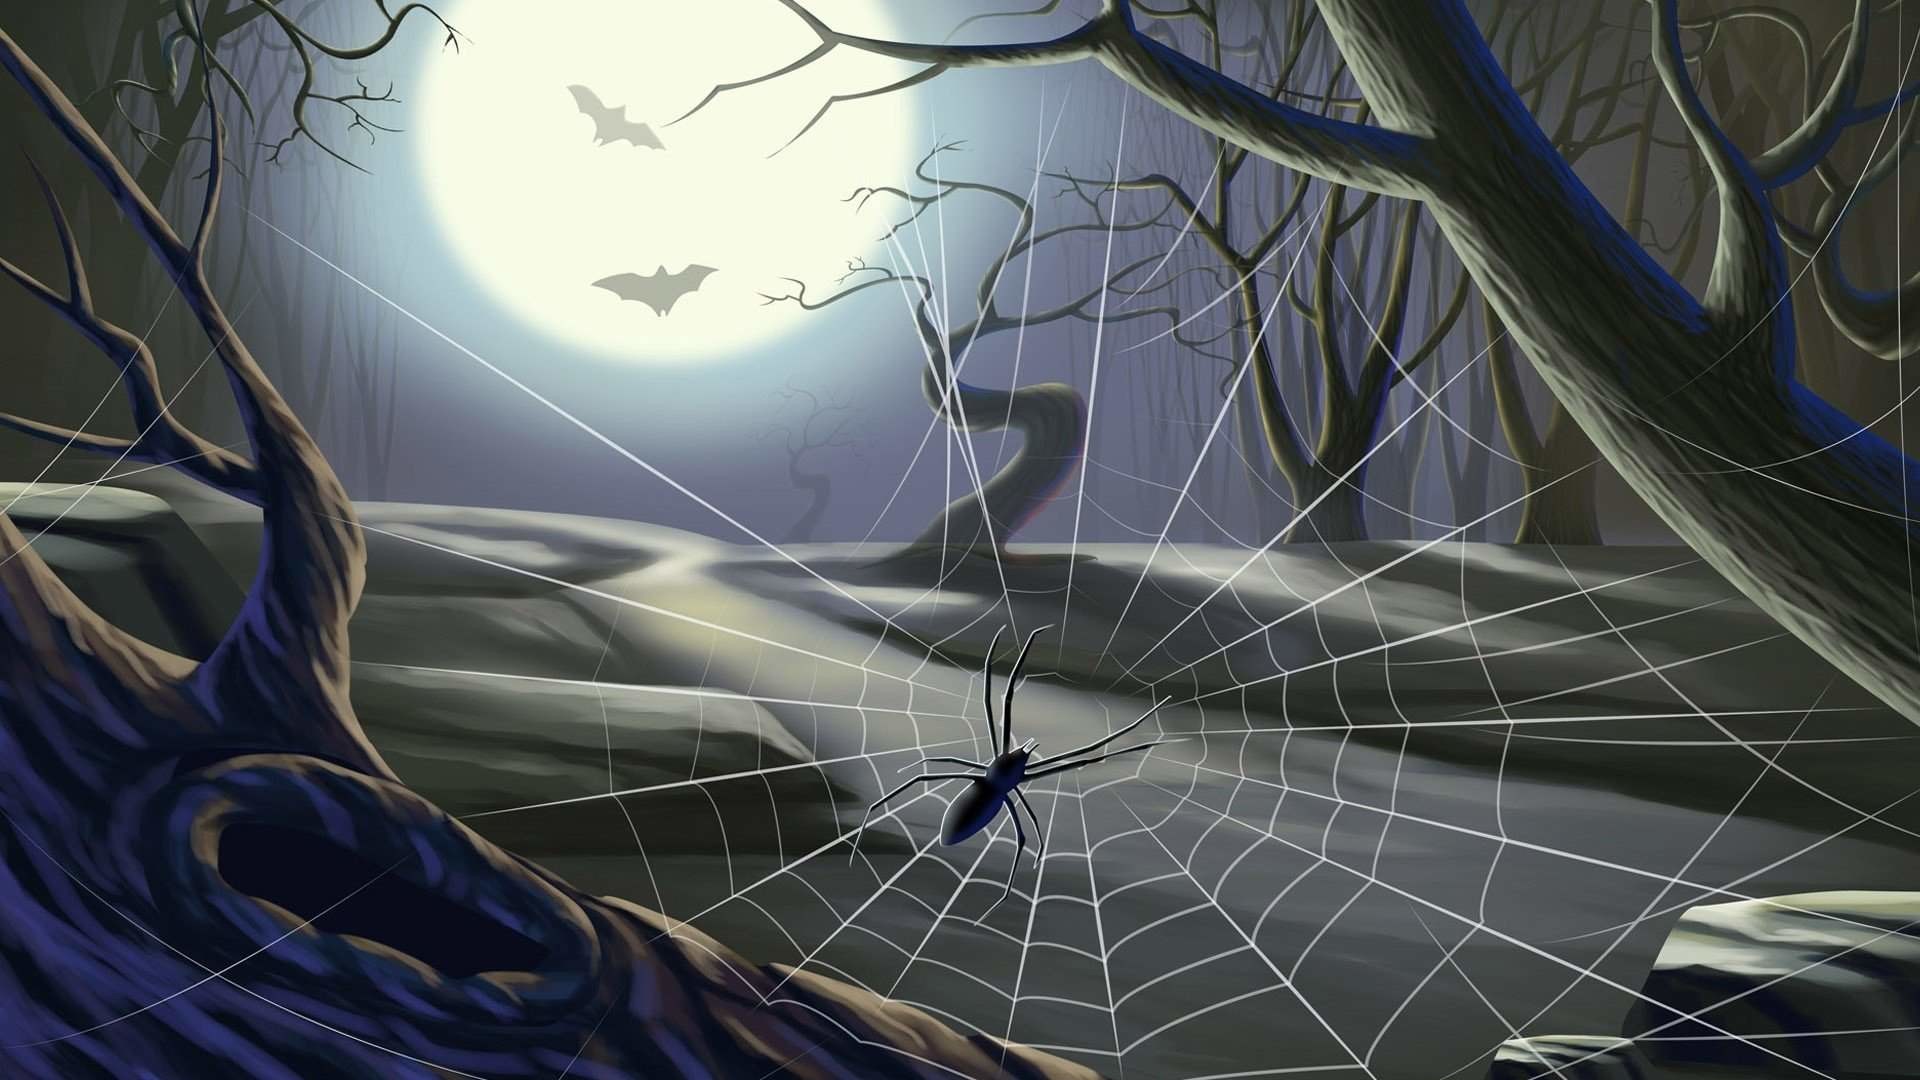 1920x1080 Images Of Scary Spider Web Wallpaper - #SC